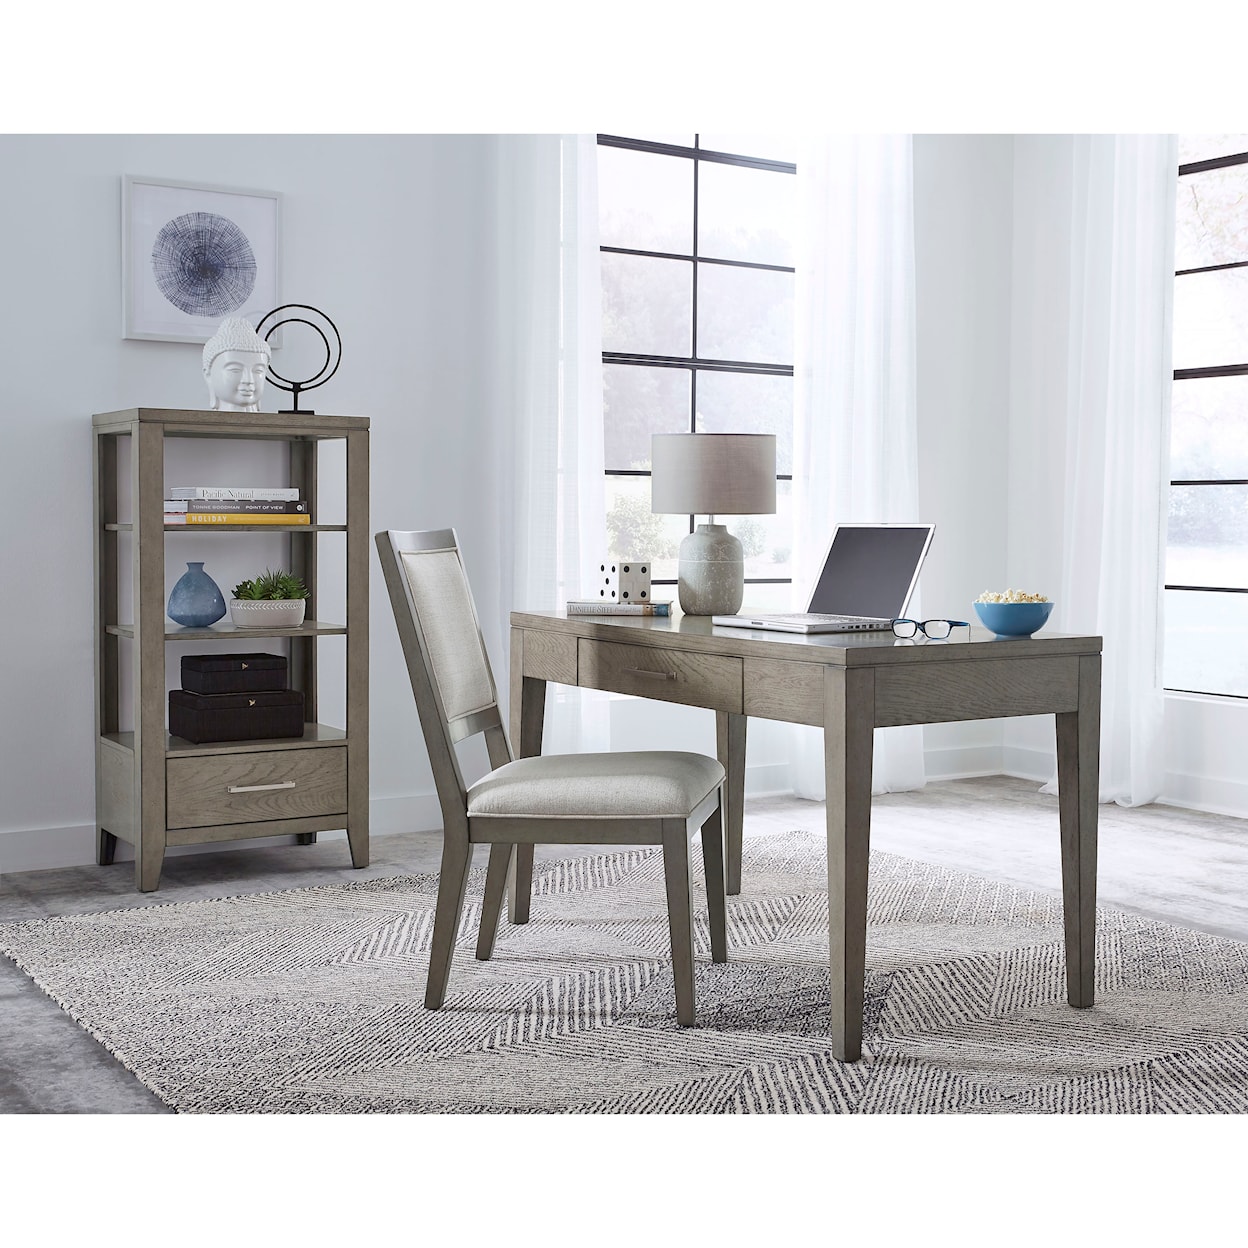 Samuel Lawrence Essex by Drew and Jonathan Home Essex Desk